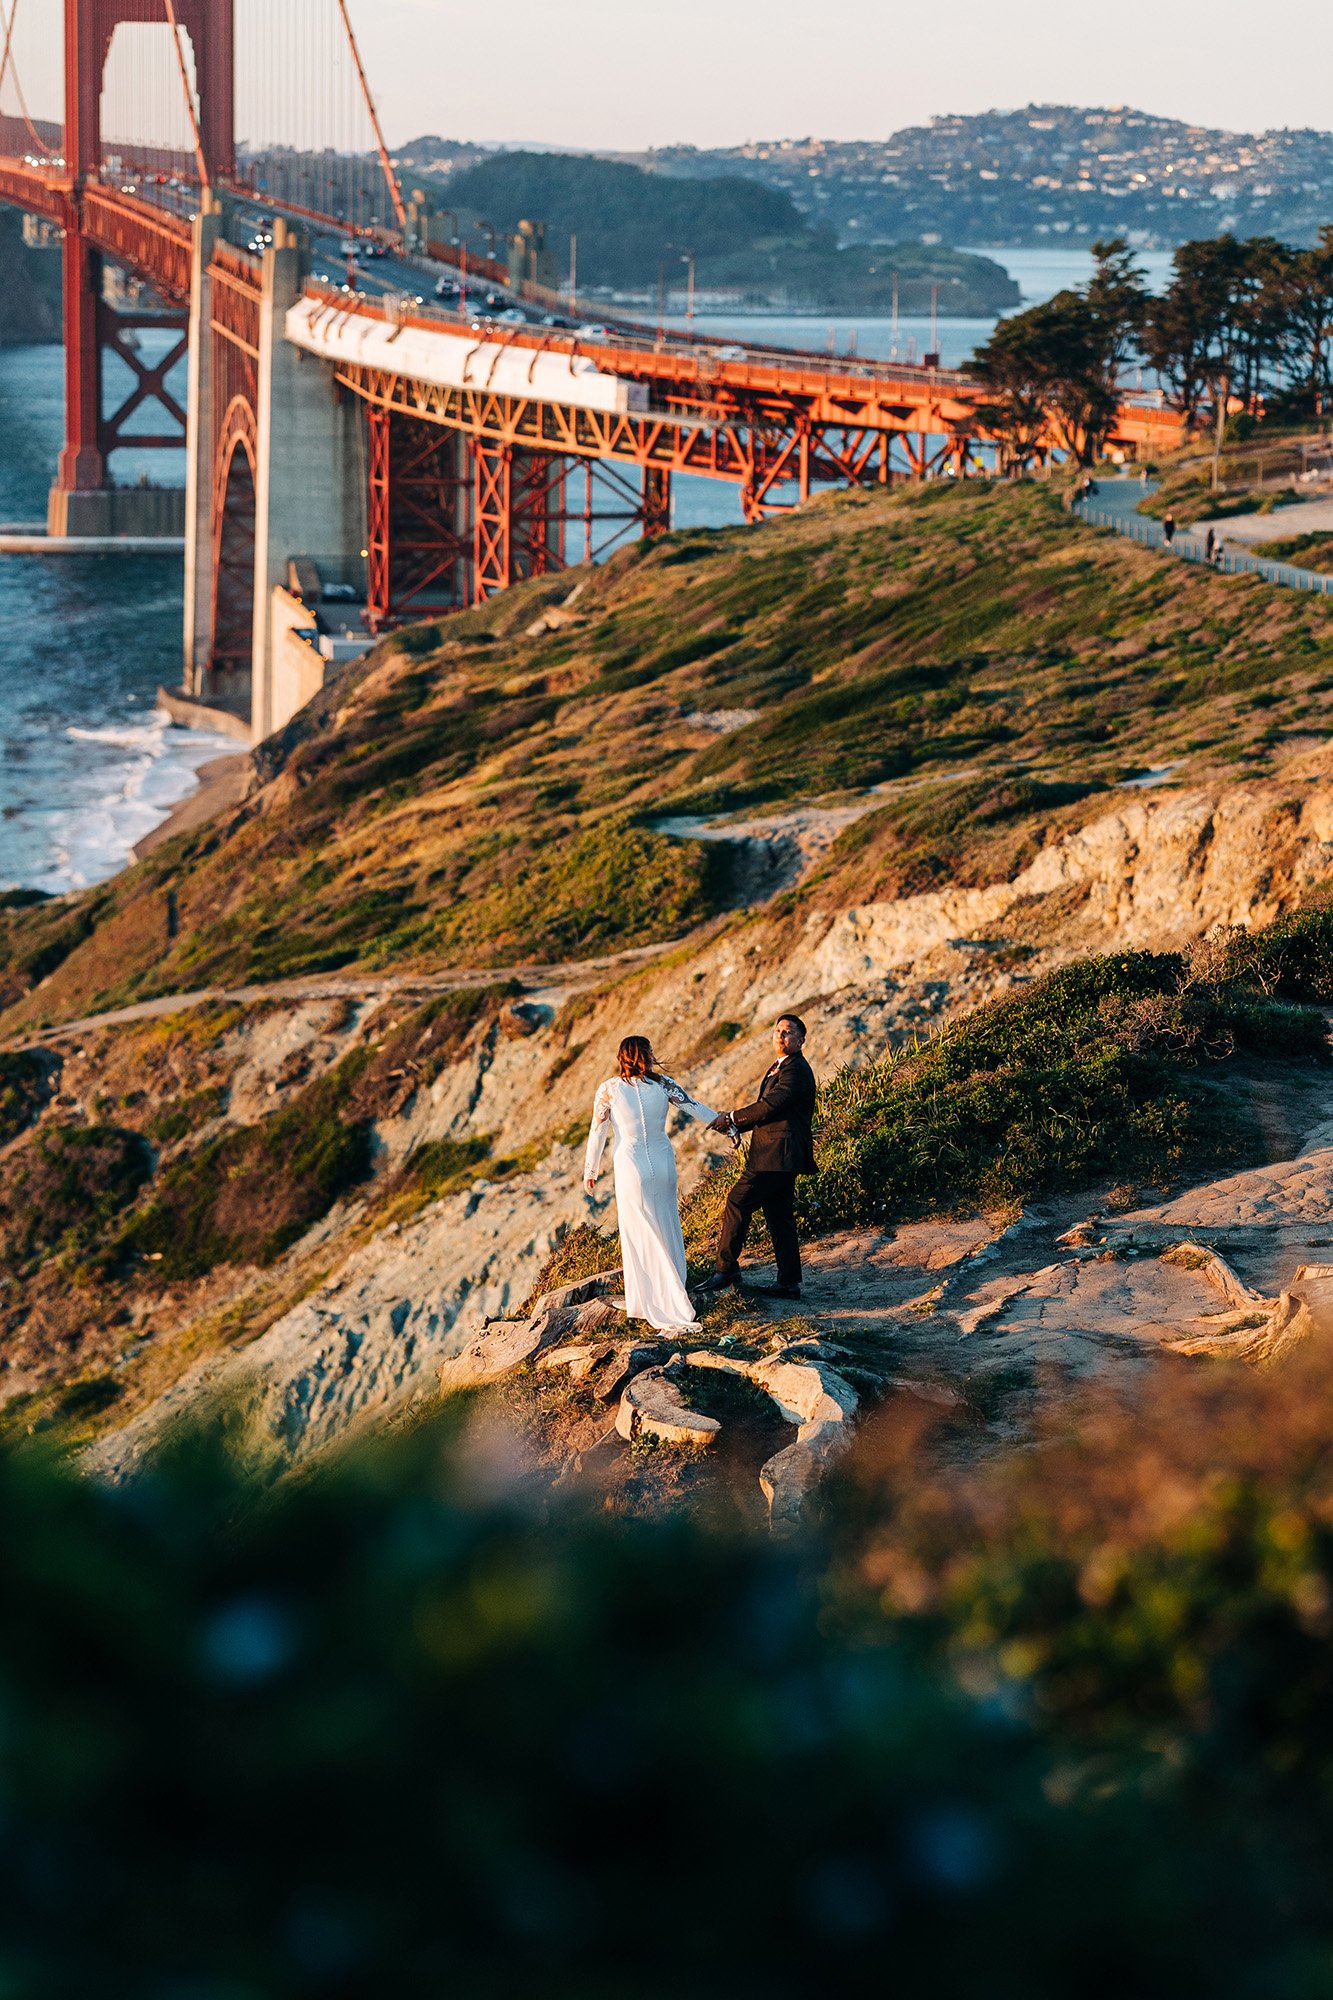 Ashley and Paul stand together on a cliff overlooking the iconic Golden Gate Bridge in San Francisco, California.